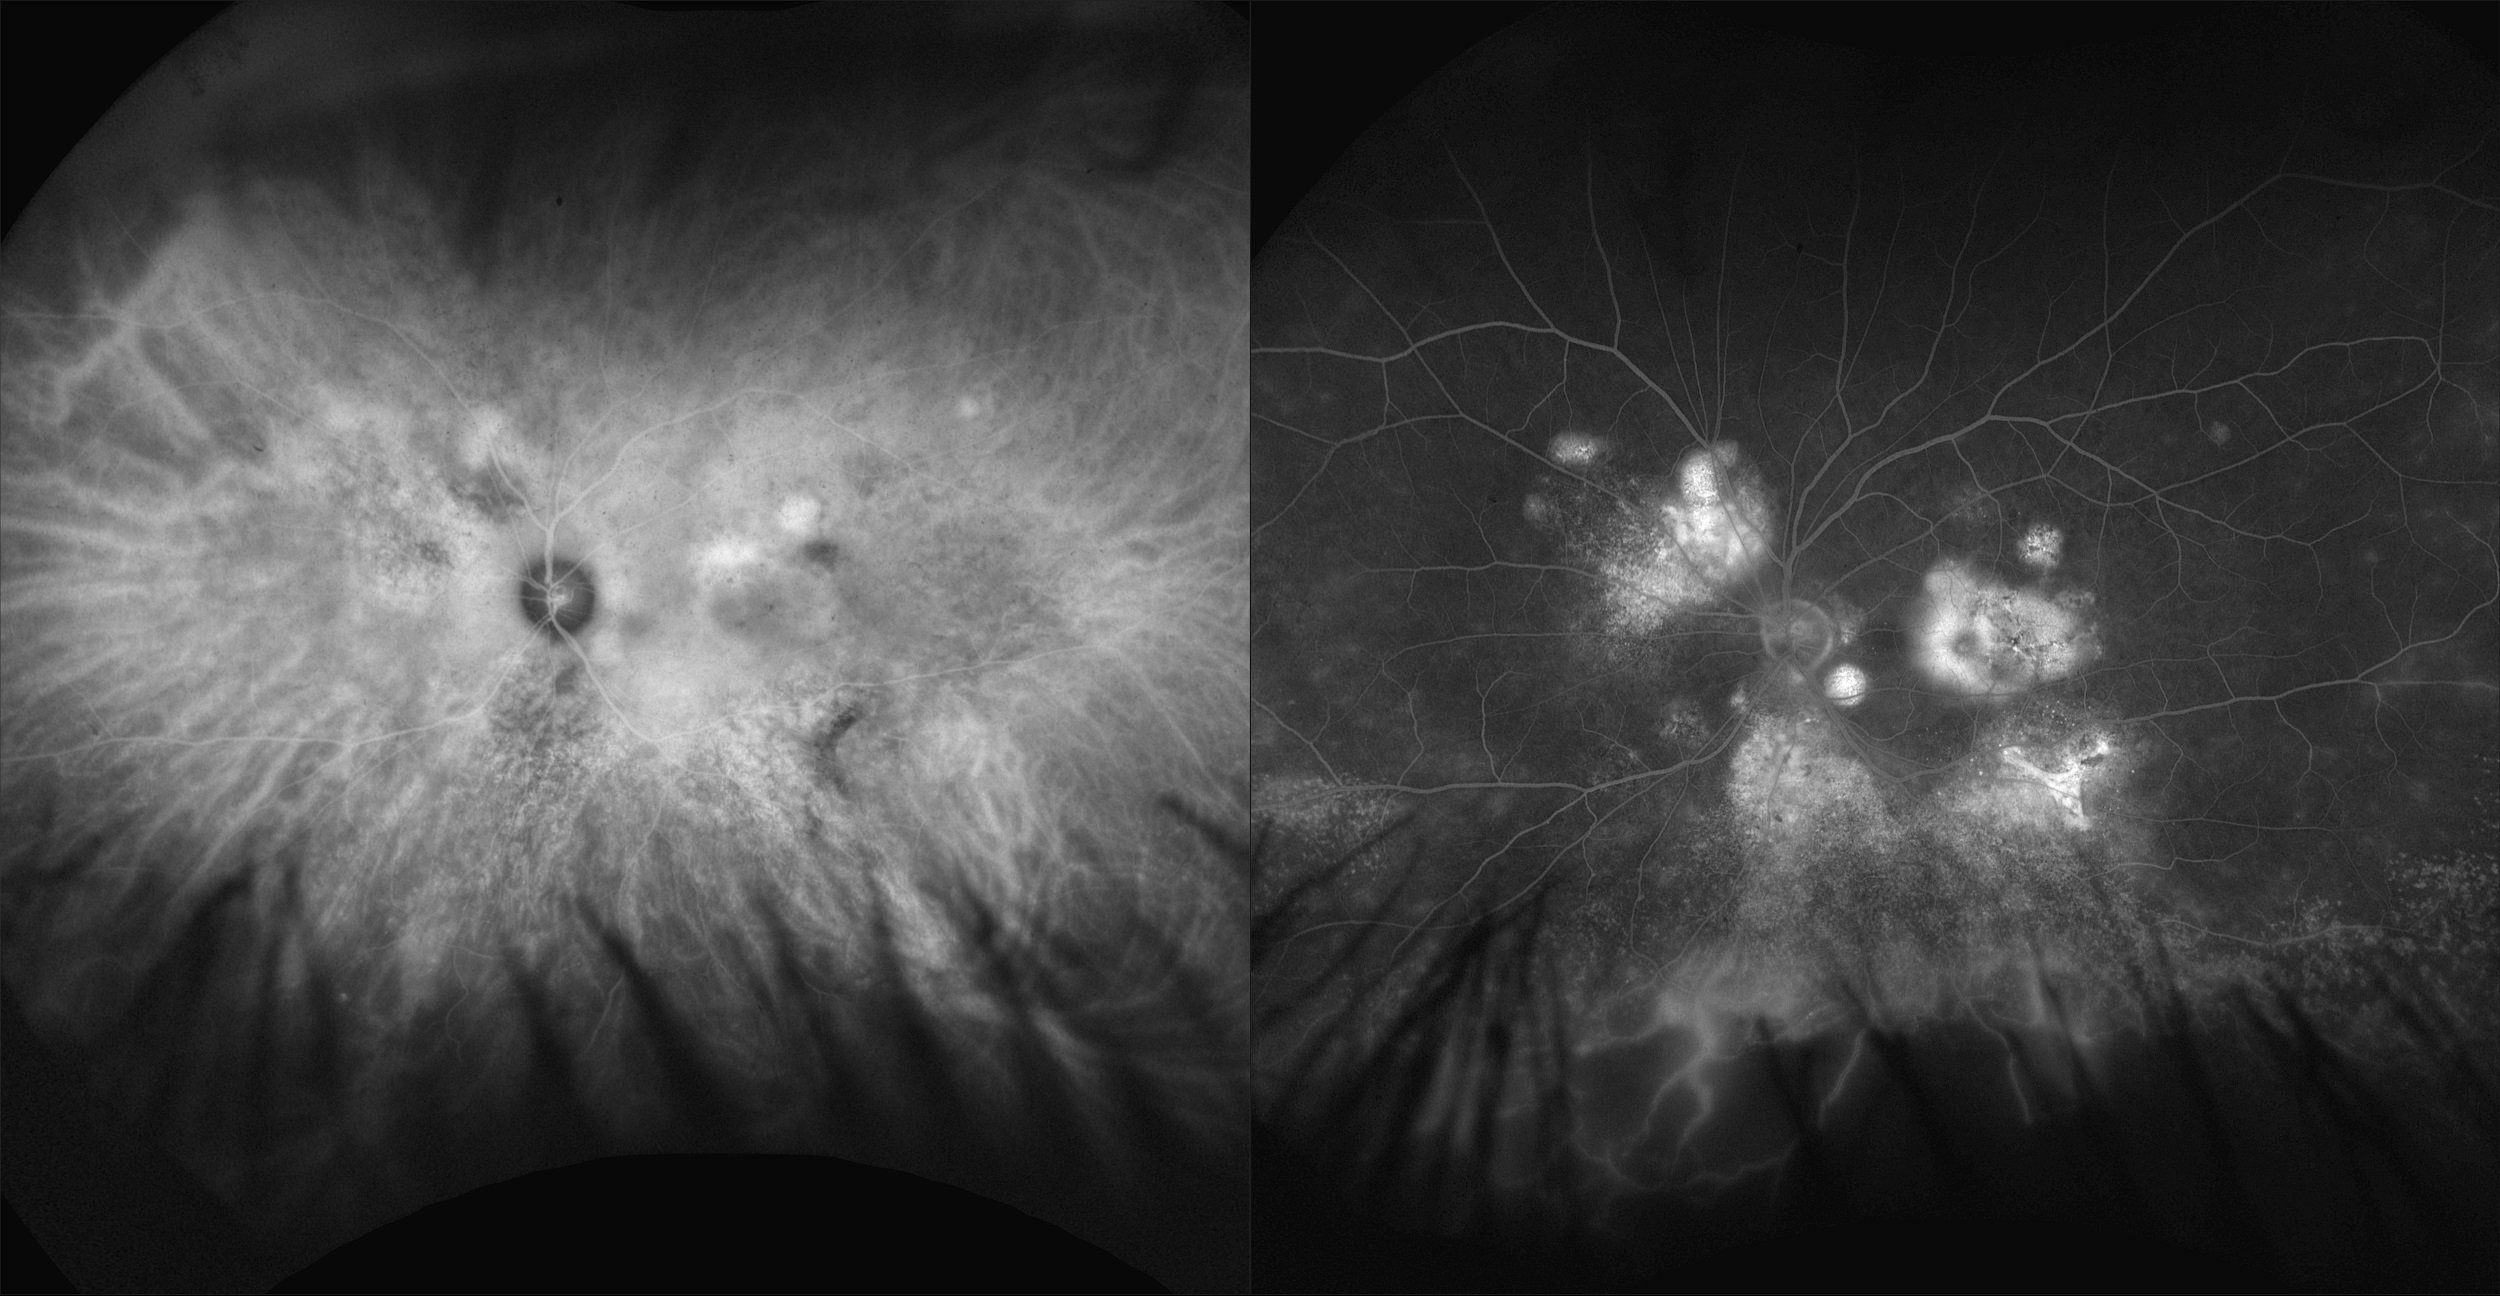 California - Central Serous Chorioretinopathy with Possible Vasculitis, AF, FA